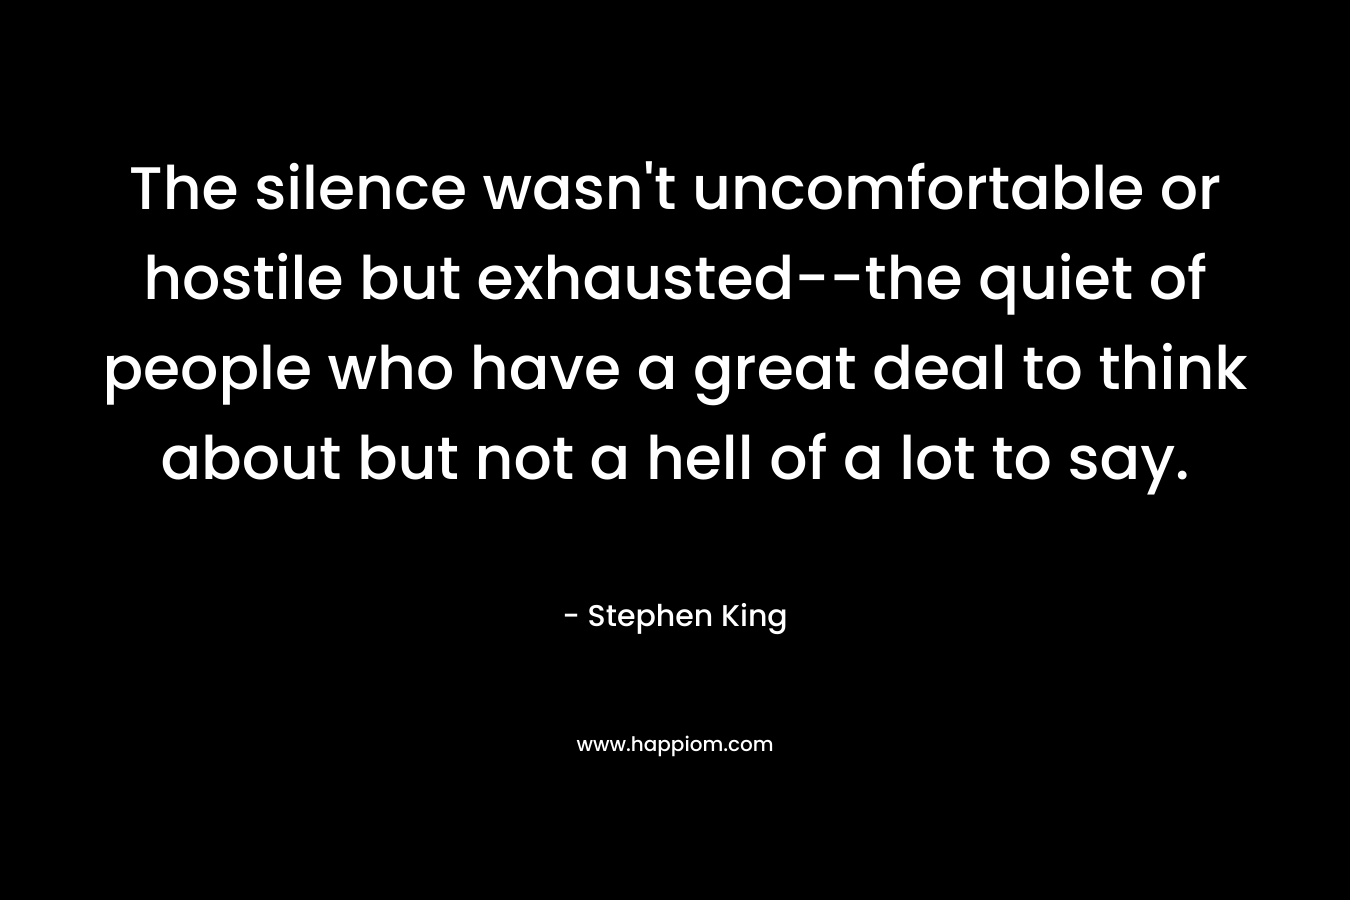 The silence wasn't uncomfortable or hostile but exhausted--the quiet of people who have a great deal to think about but not a hell of a lot to say.